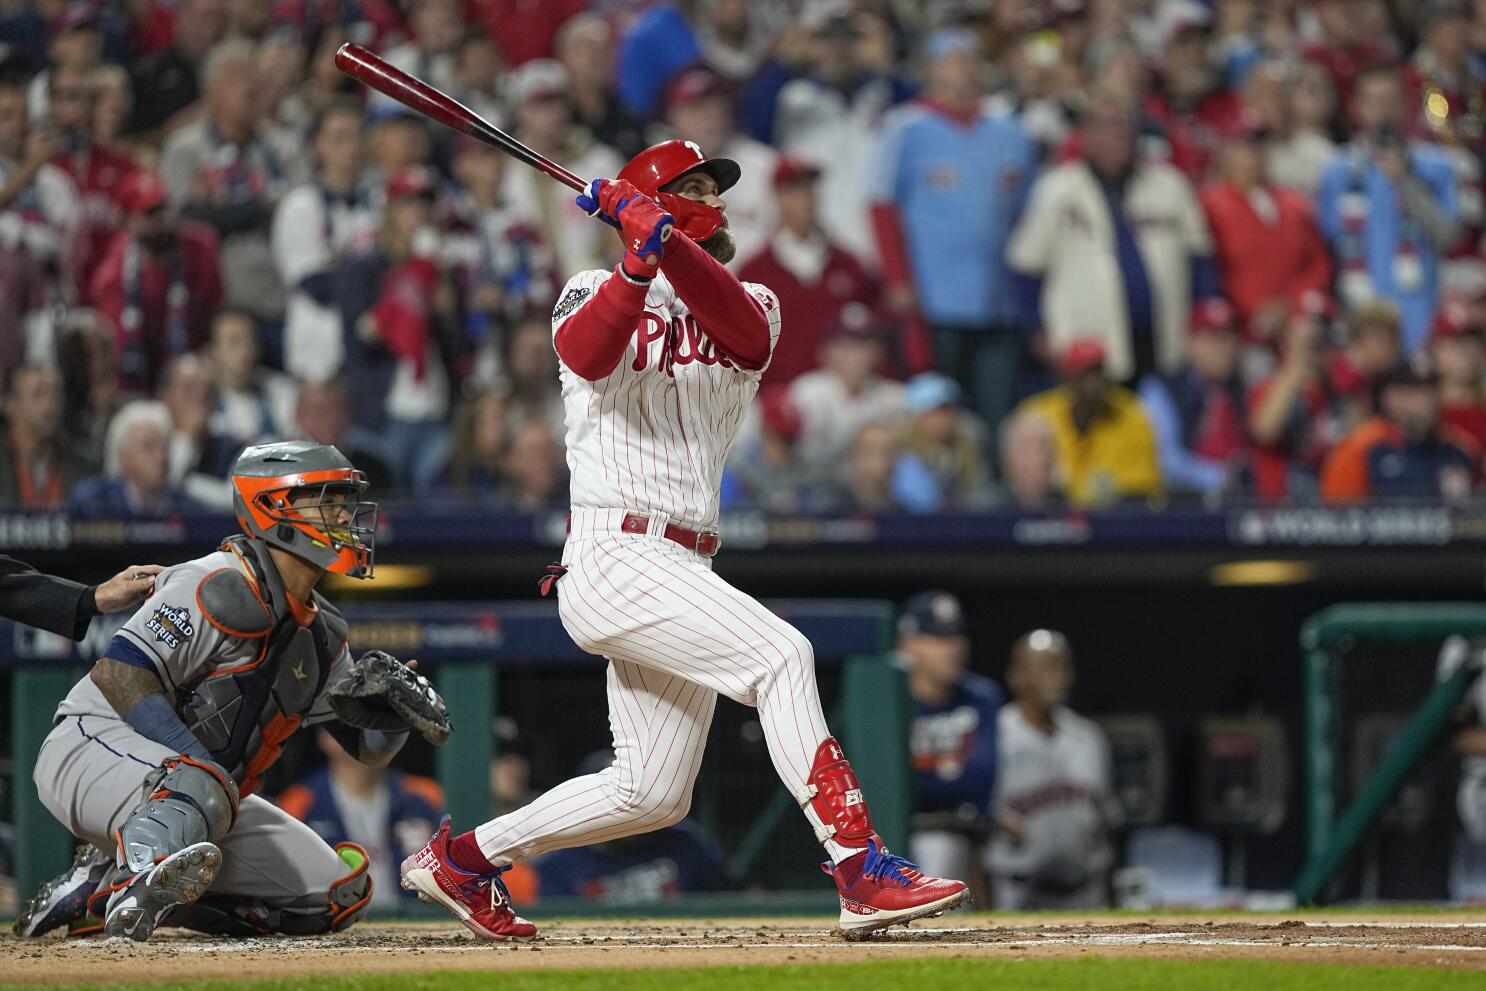 Phillies lineup: Batting order, pitcher for Game 2 vs. Astros in